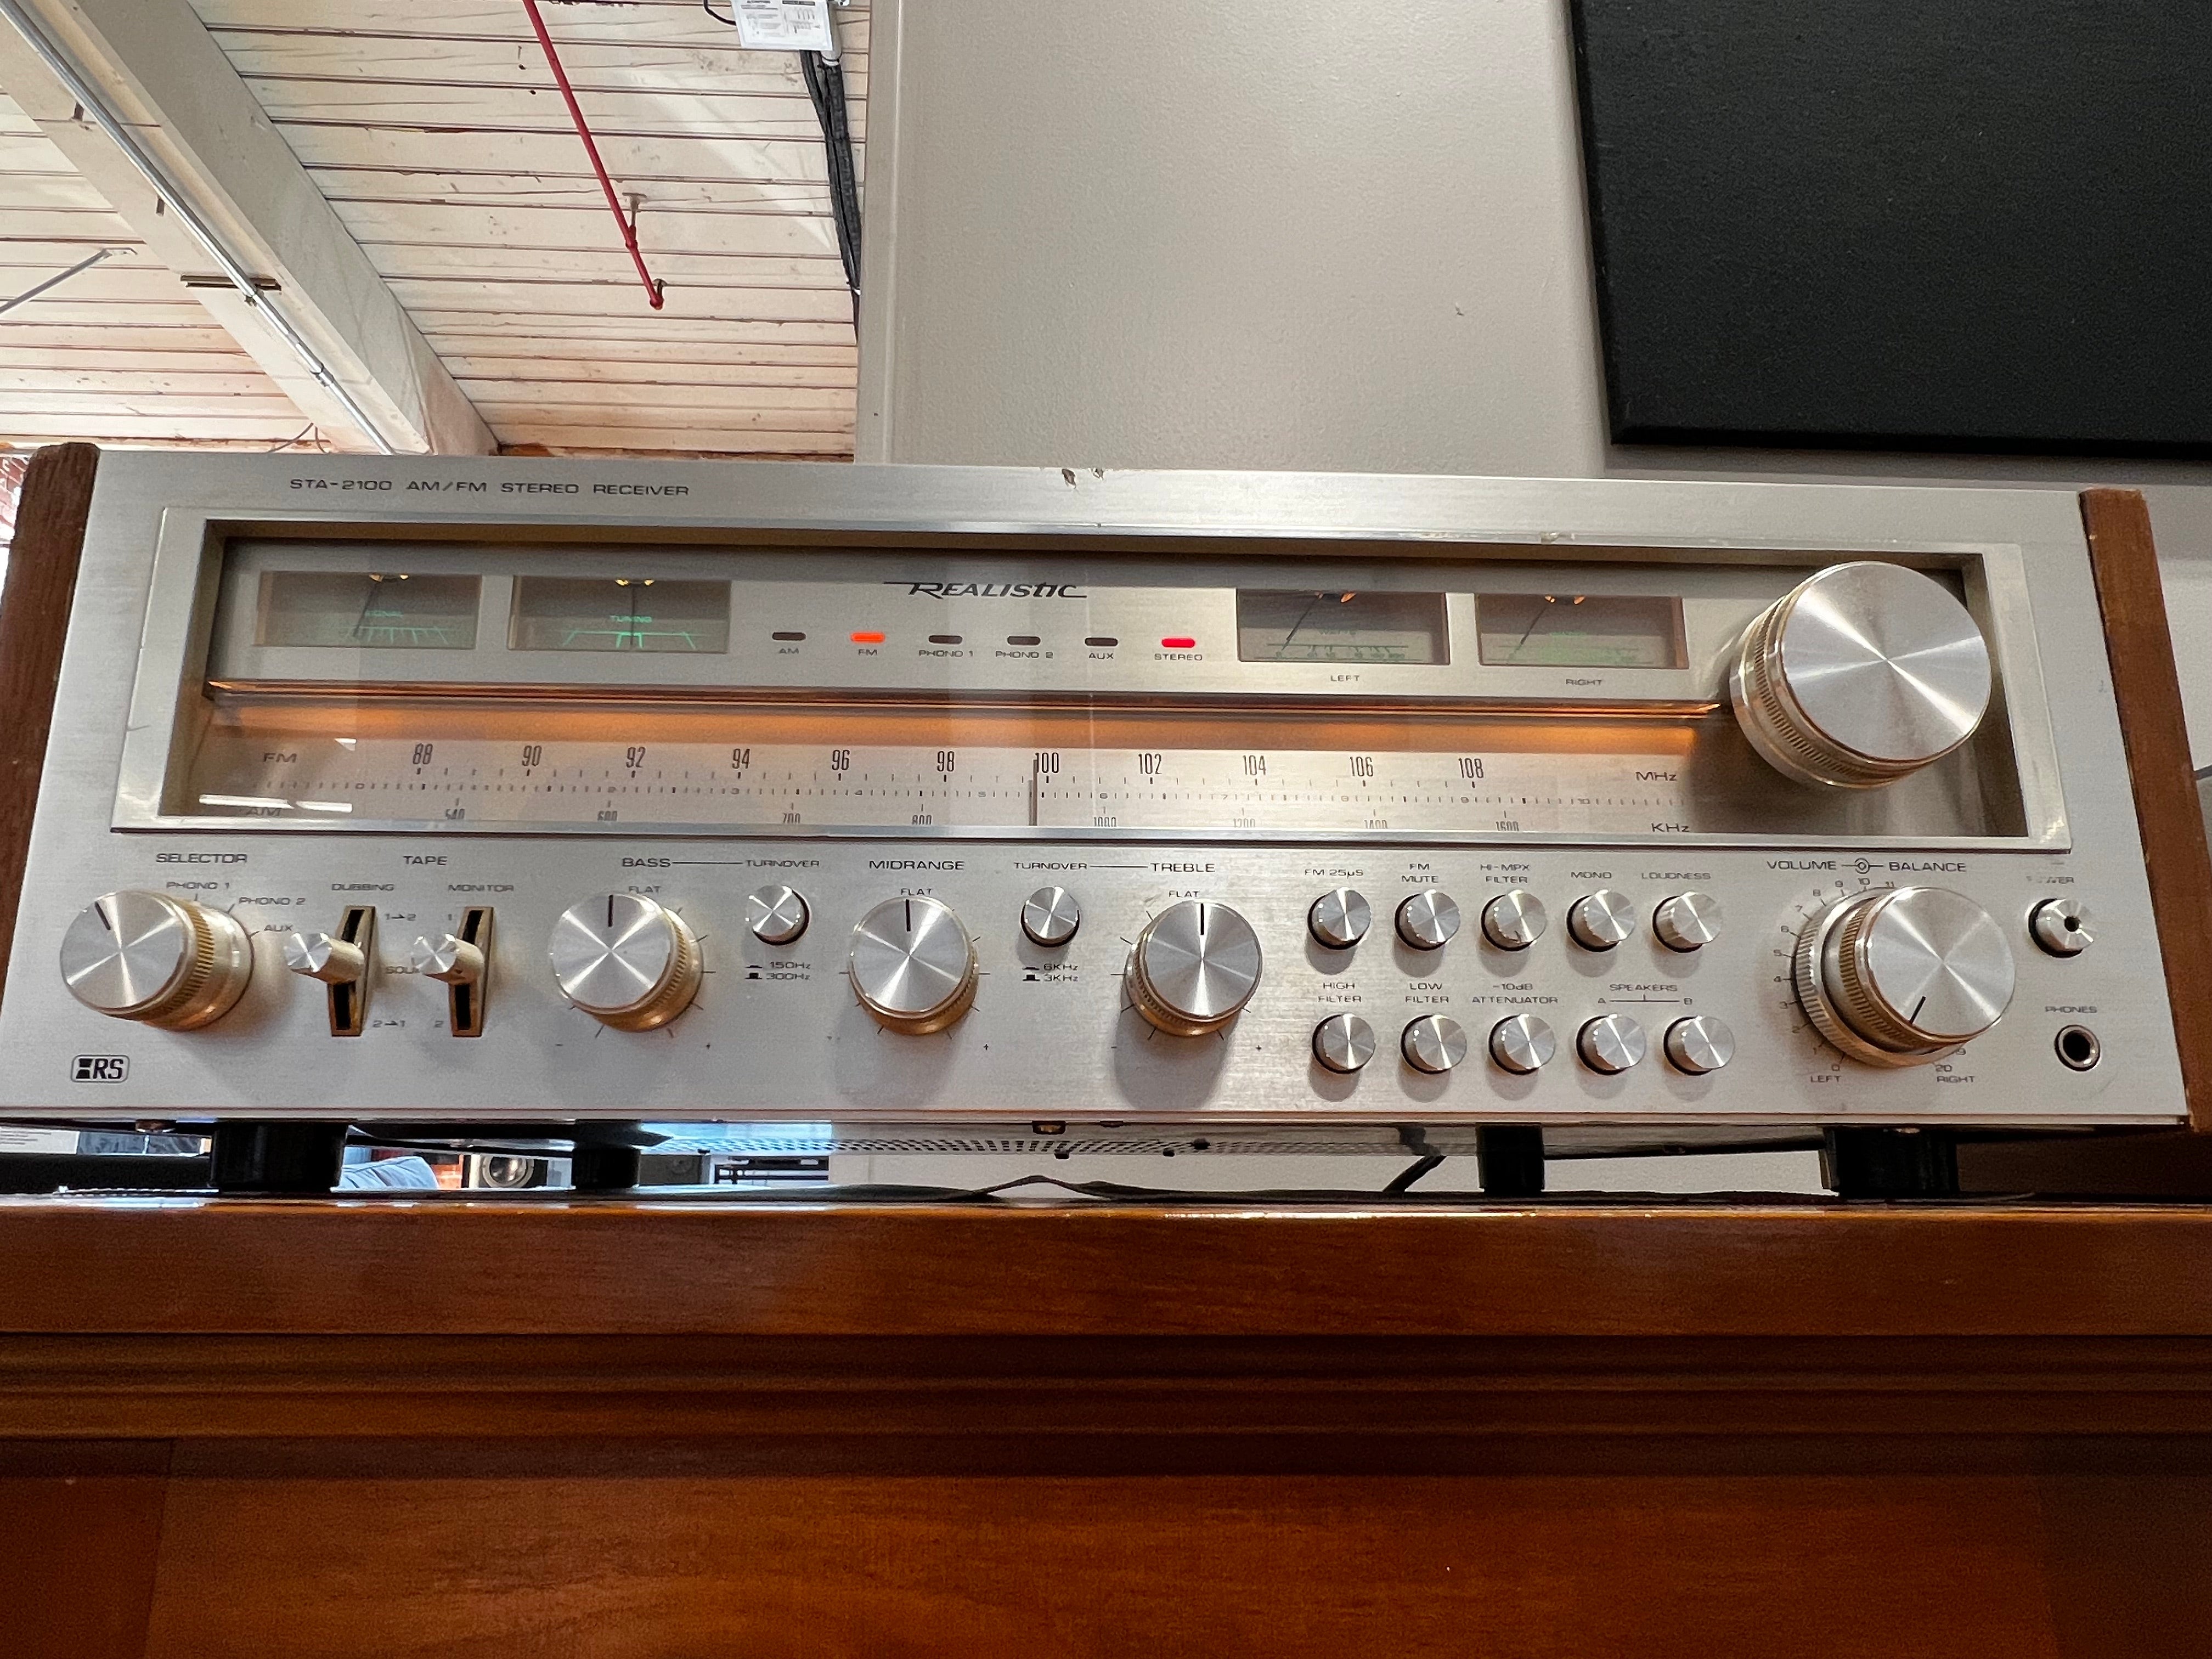 Realistic STA-2100 Receiver, Monster Power on a Budget!